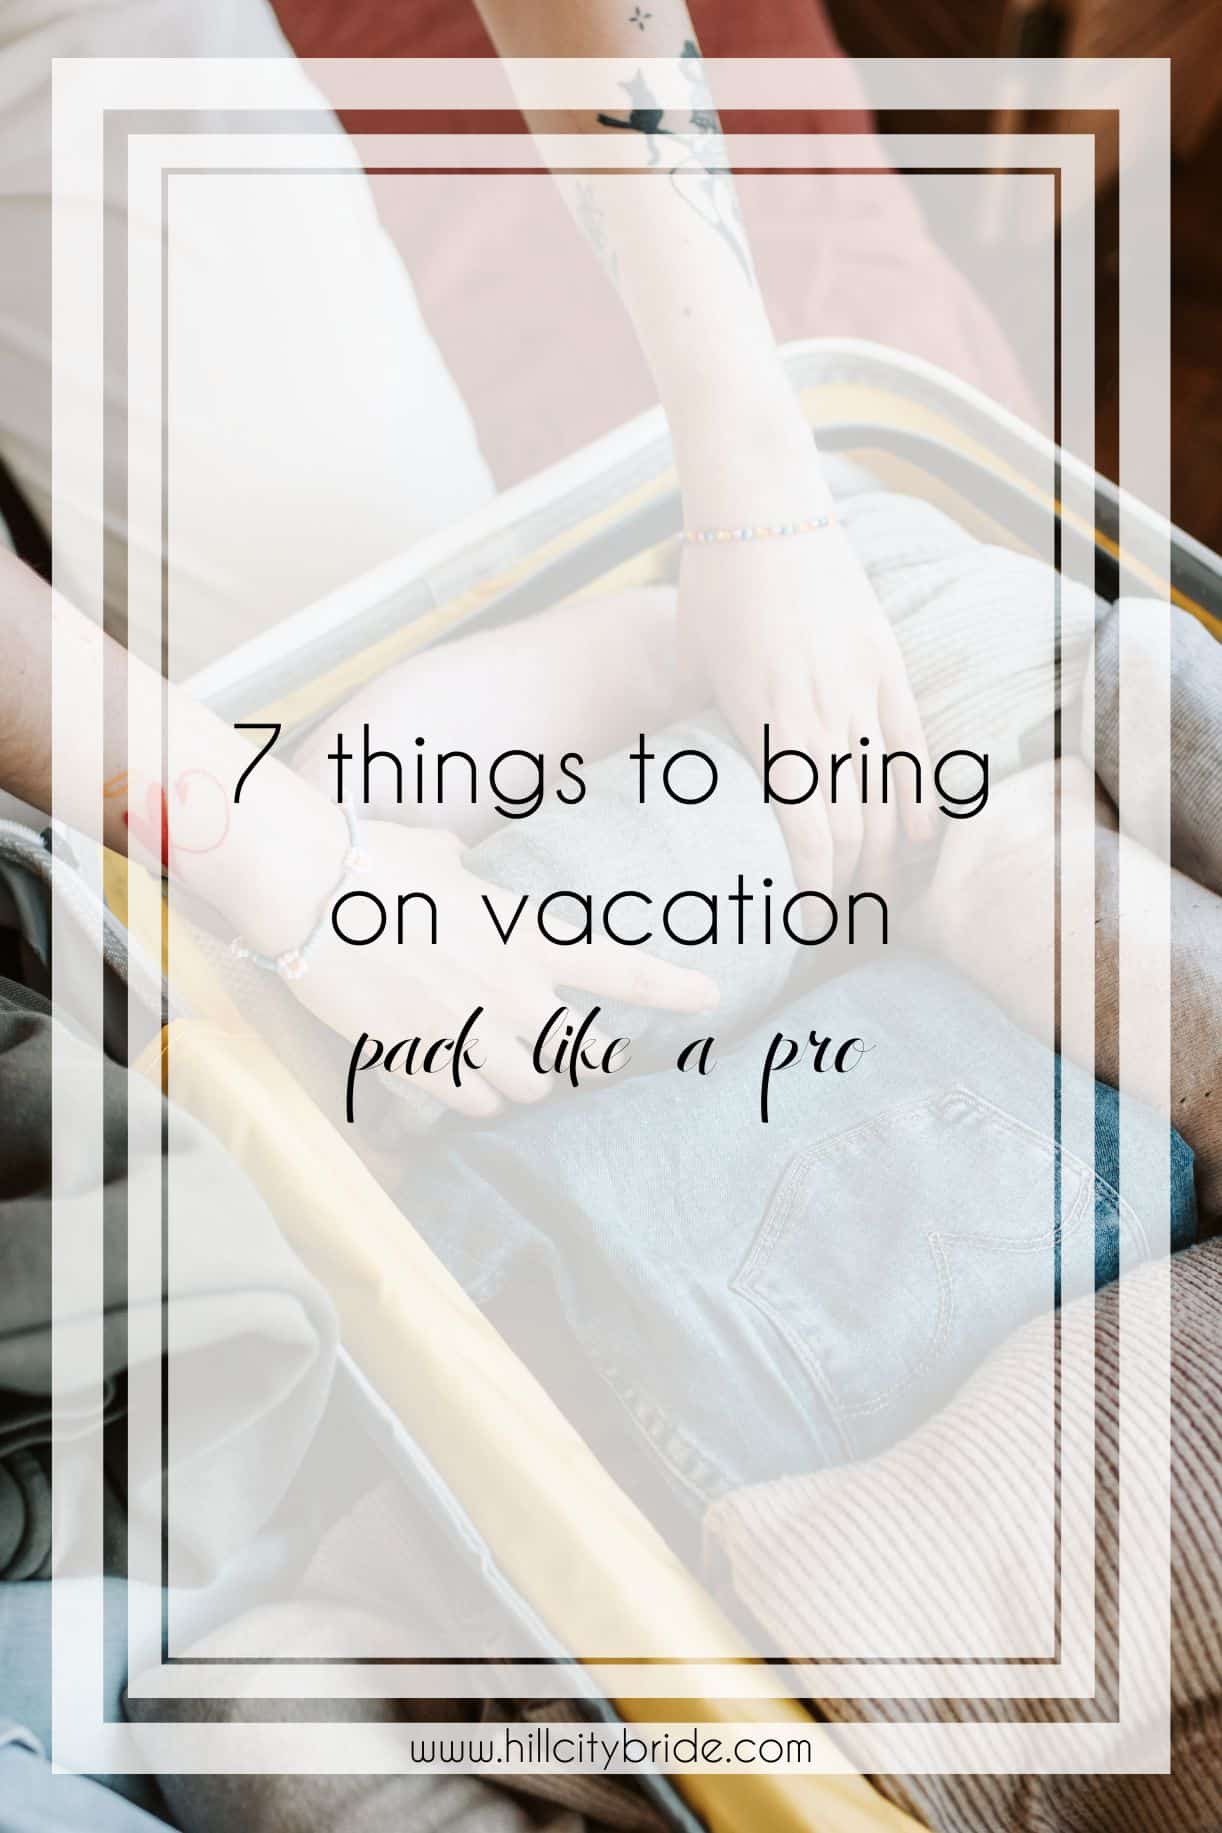 7 Things to Bring on Vacation That You Would Never Think To Pack